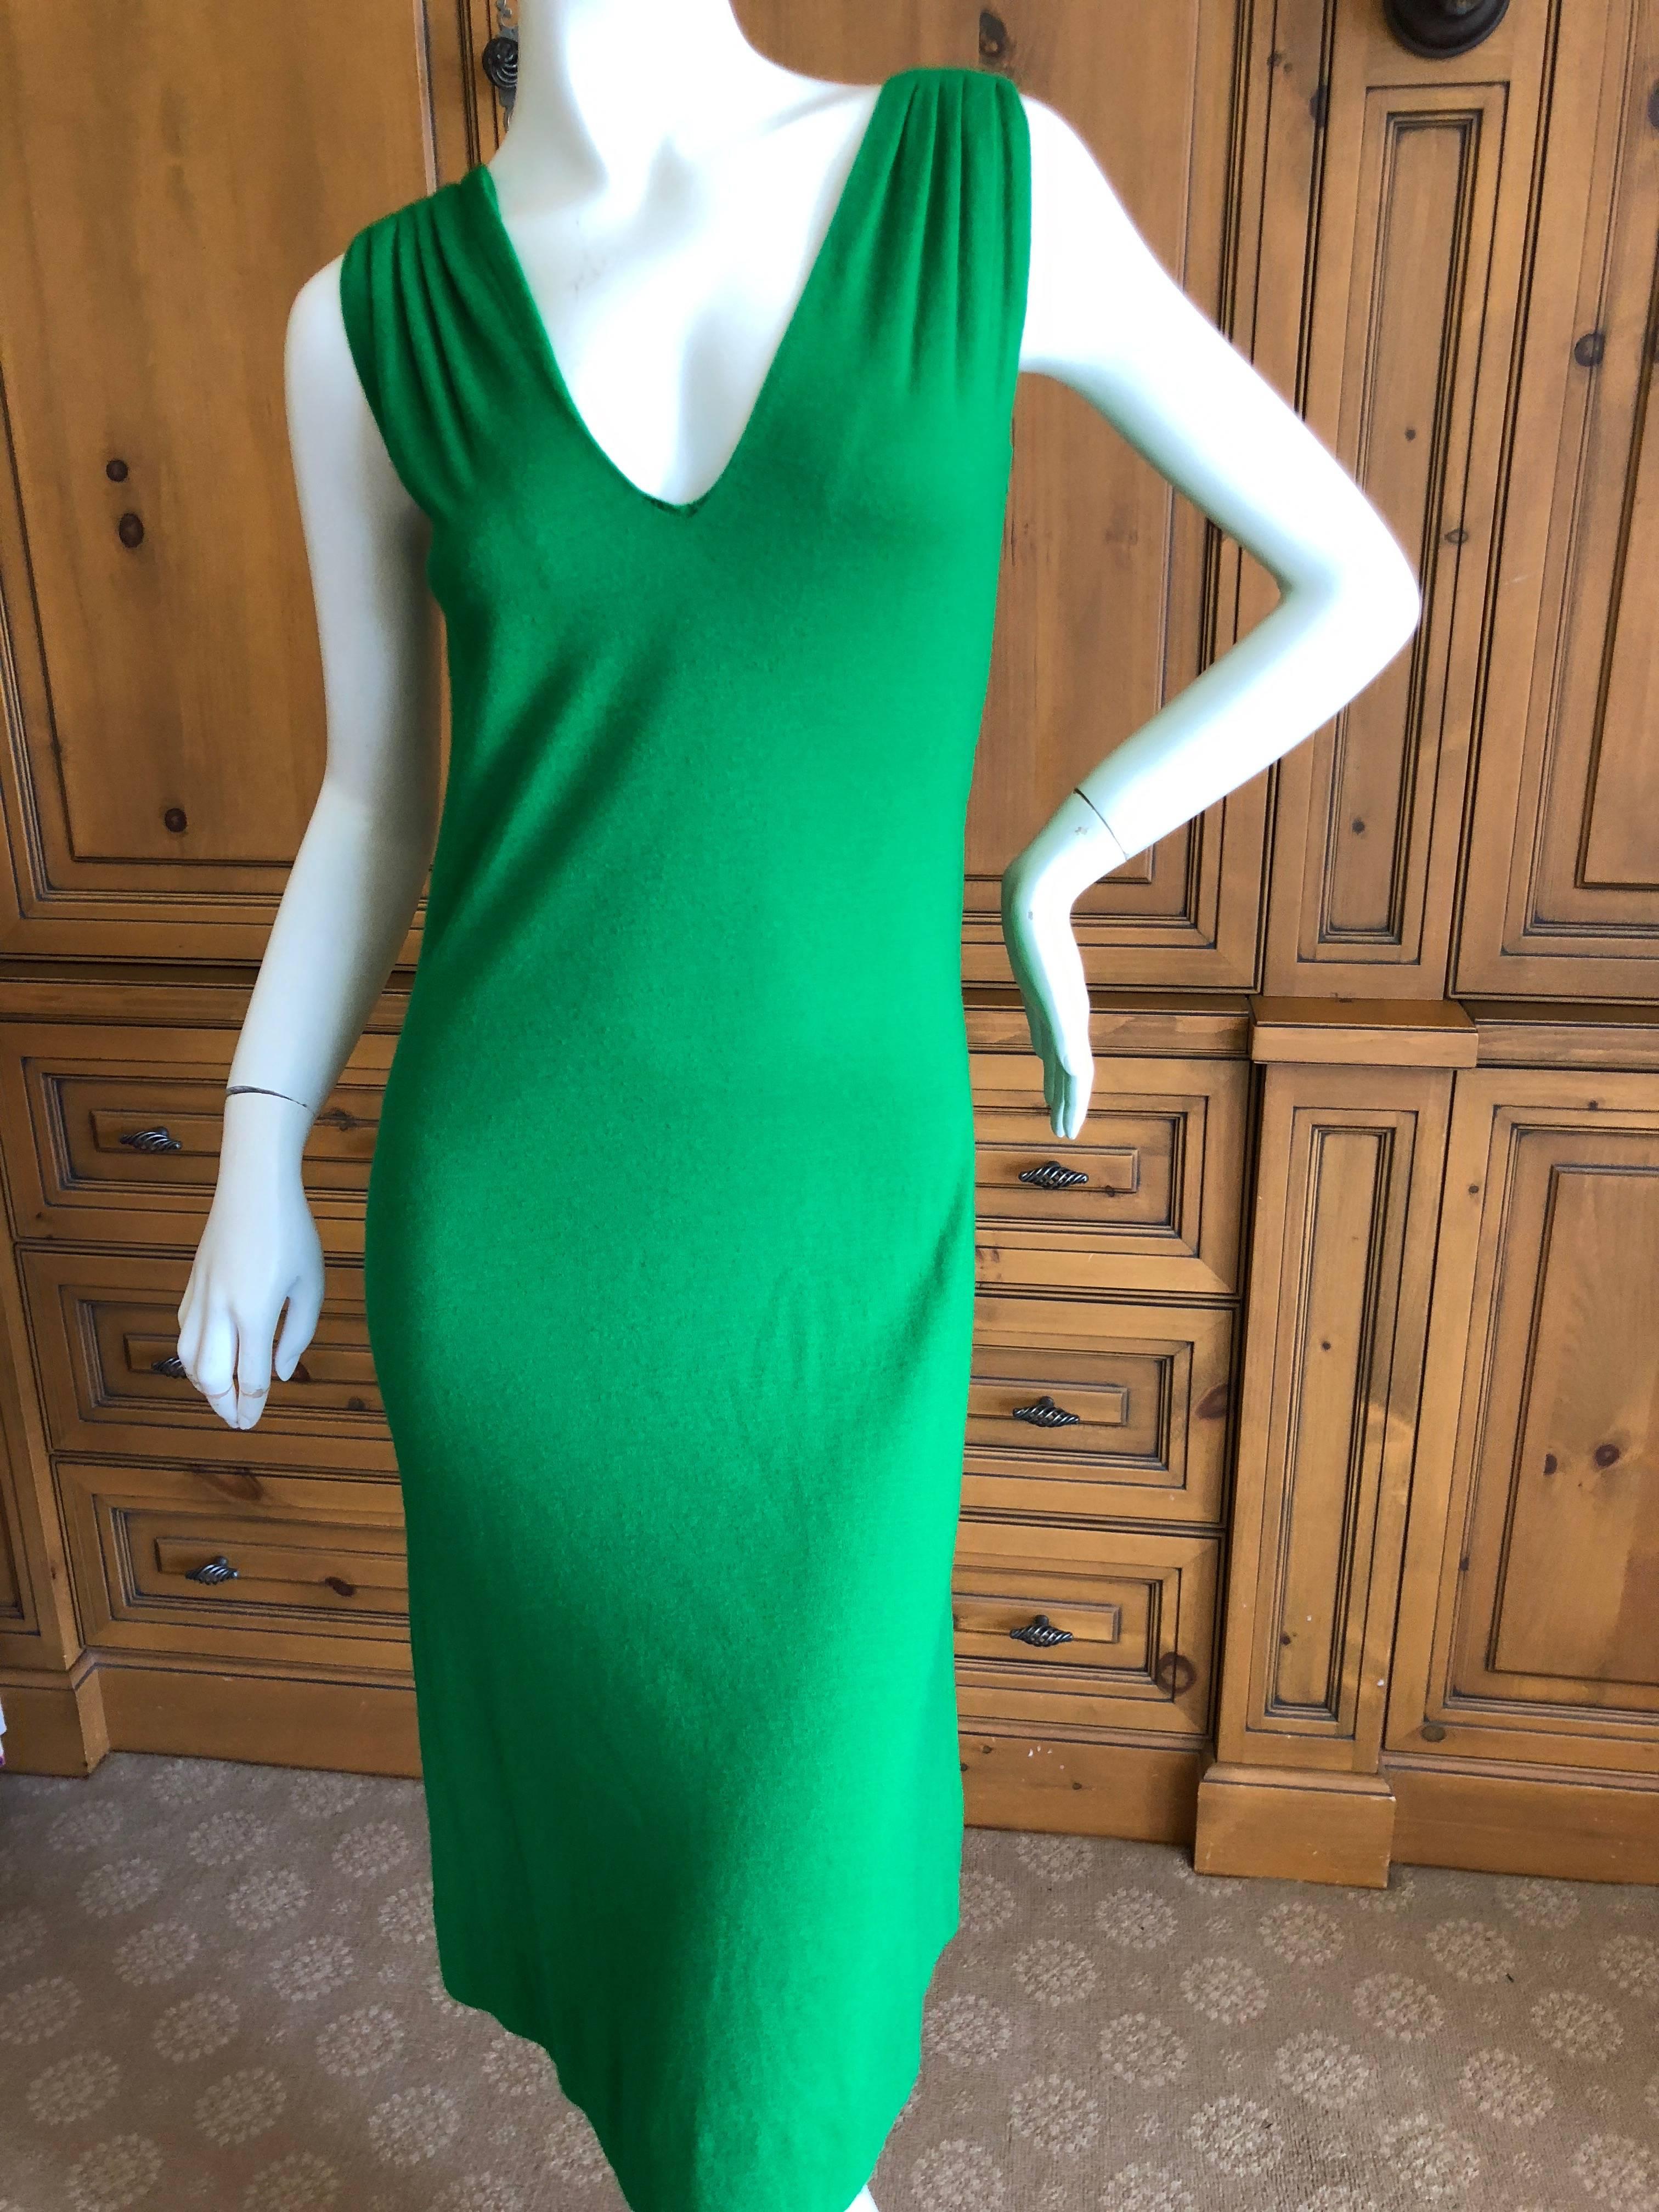 Cardinali Luxurious Lime Green Cashmere Dress and Matching Cape In Excellent Condition For Sale In Cloverdale, CA